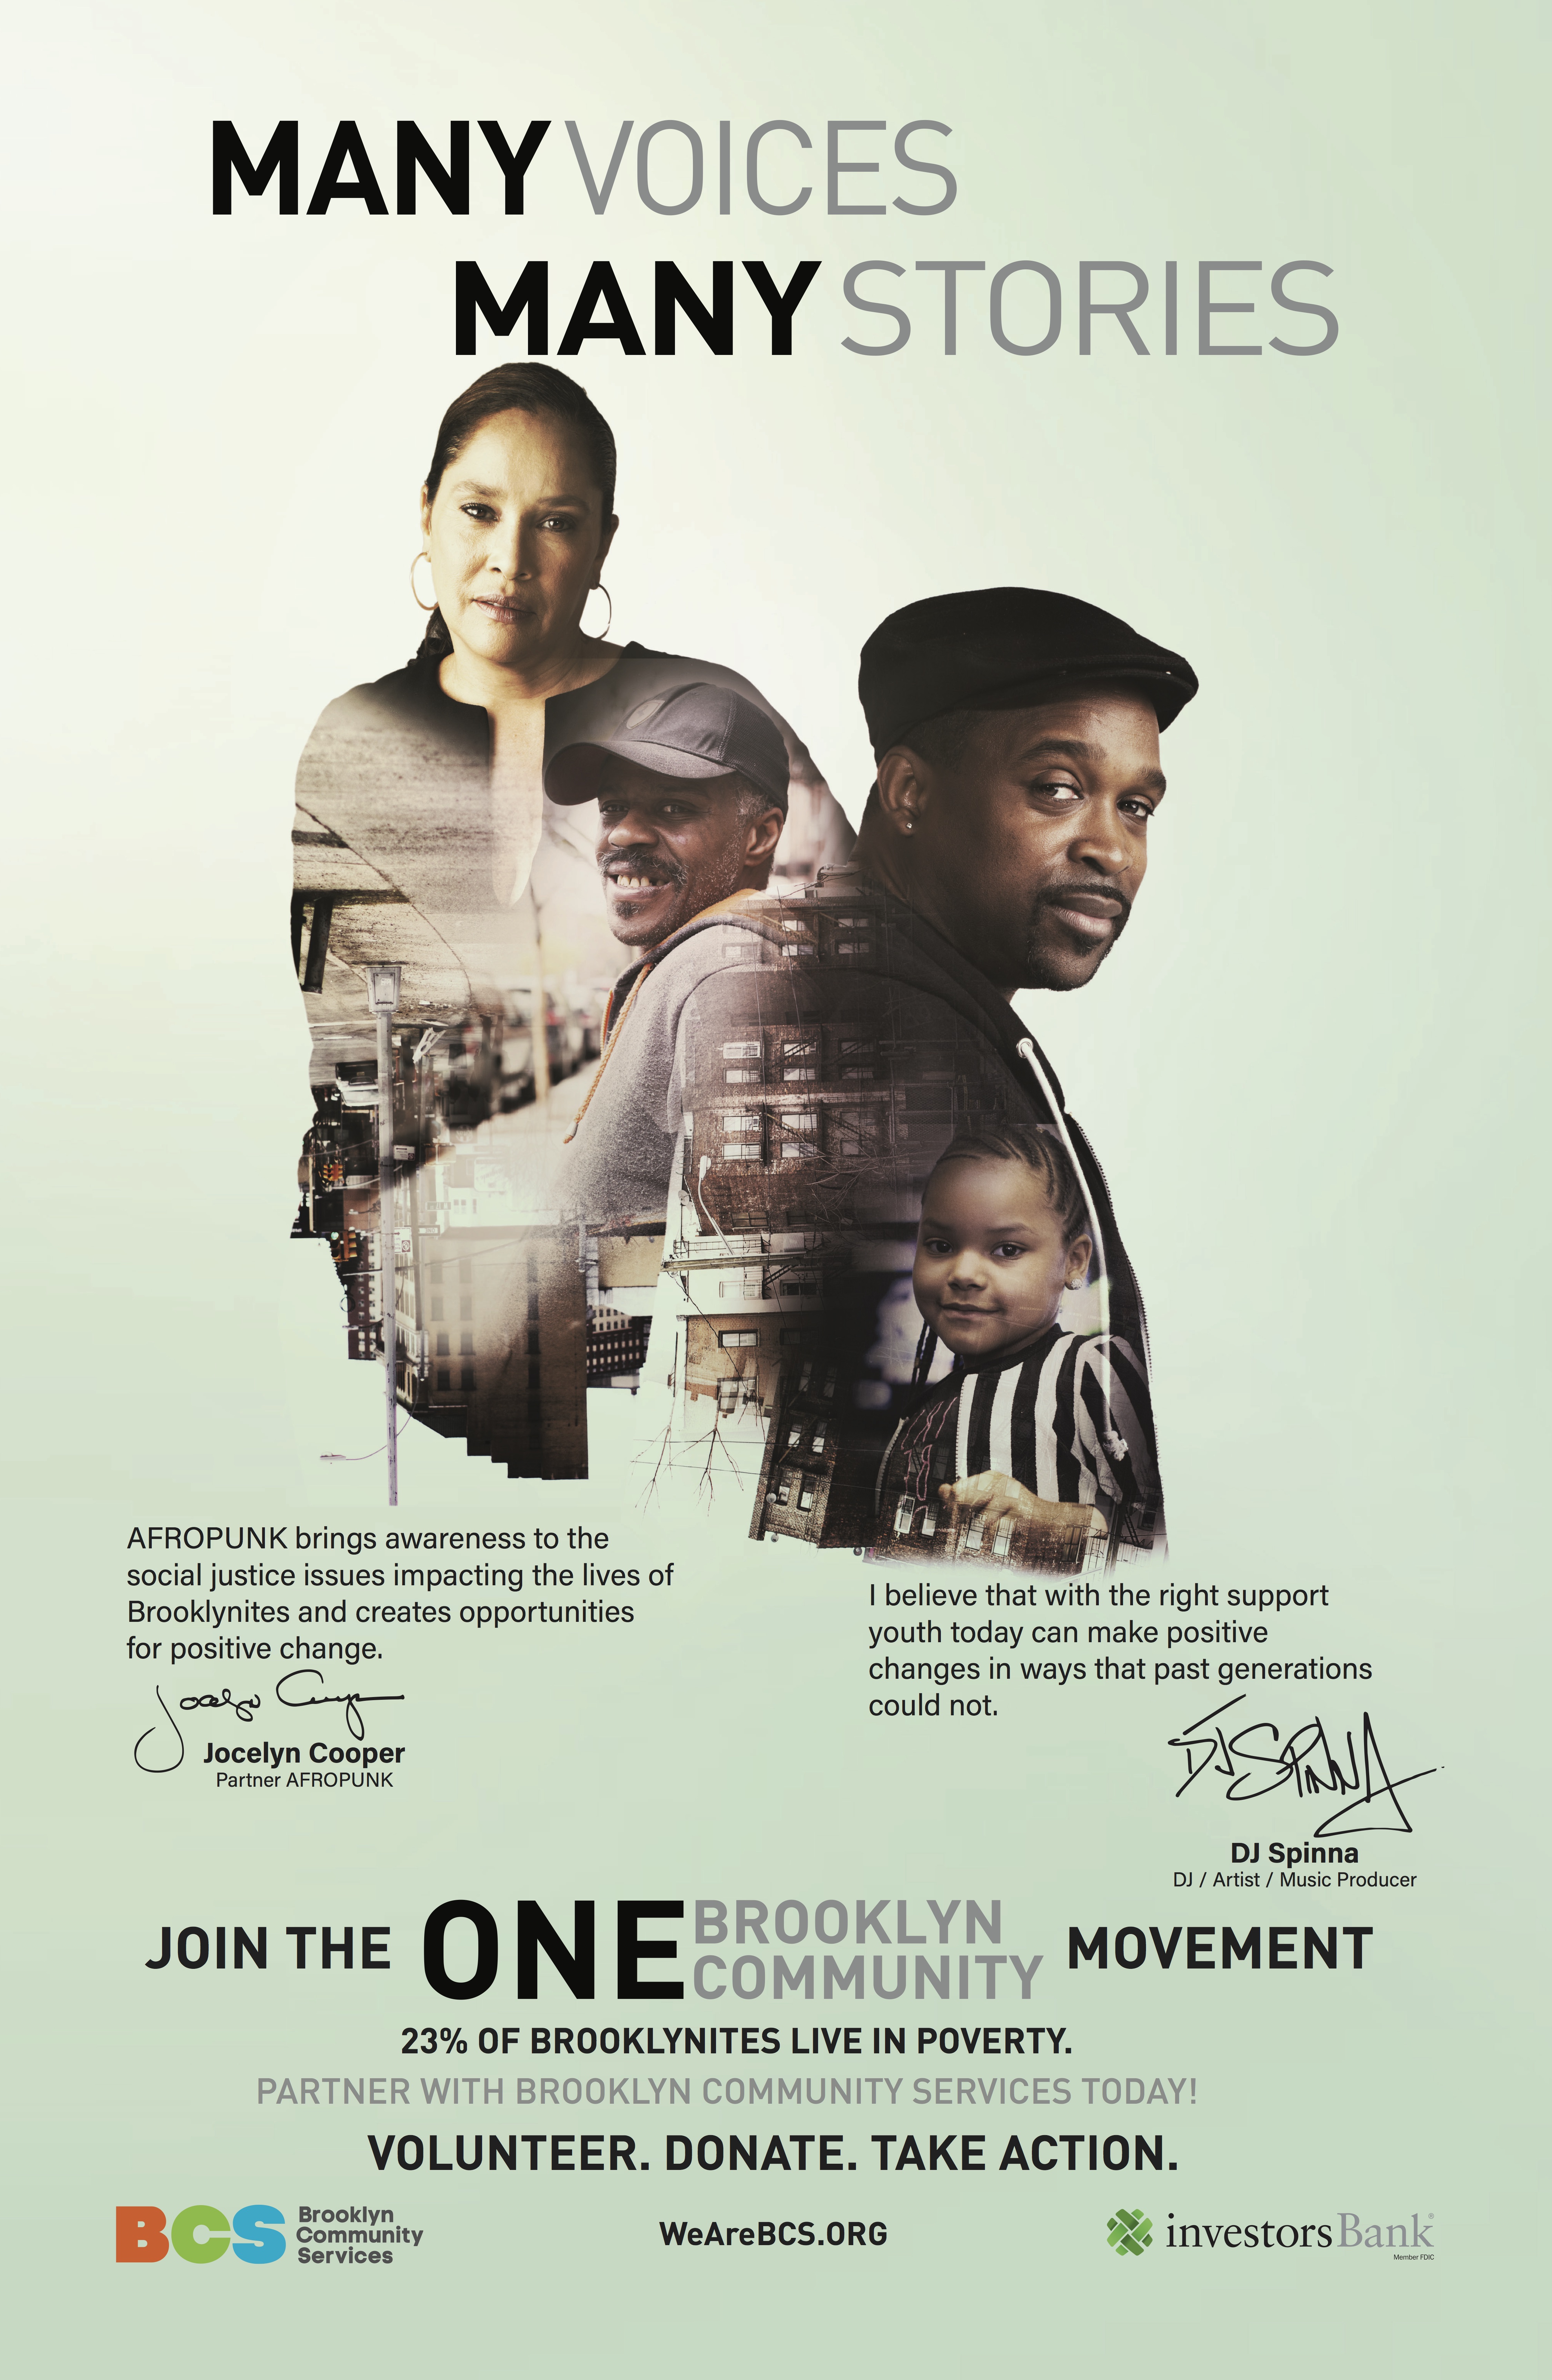 AFROPUNK partner & co-founder Jocelyn Cooper and DJ Spinna in BCS ONE Brooklyn Community “Many Voices, Many Stories” campaign